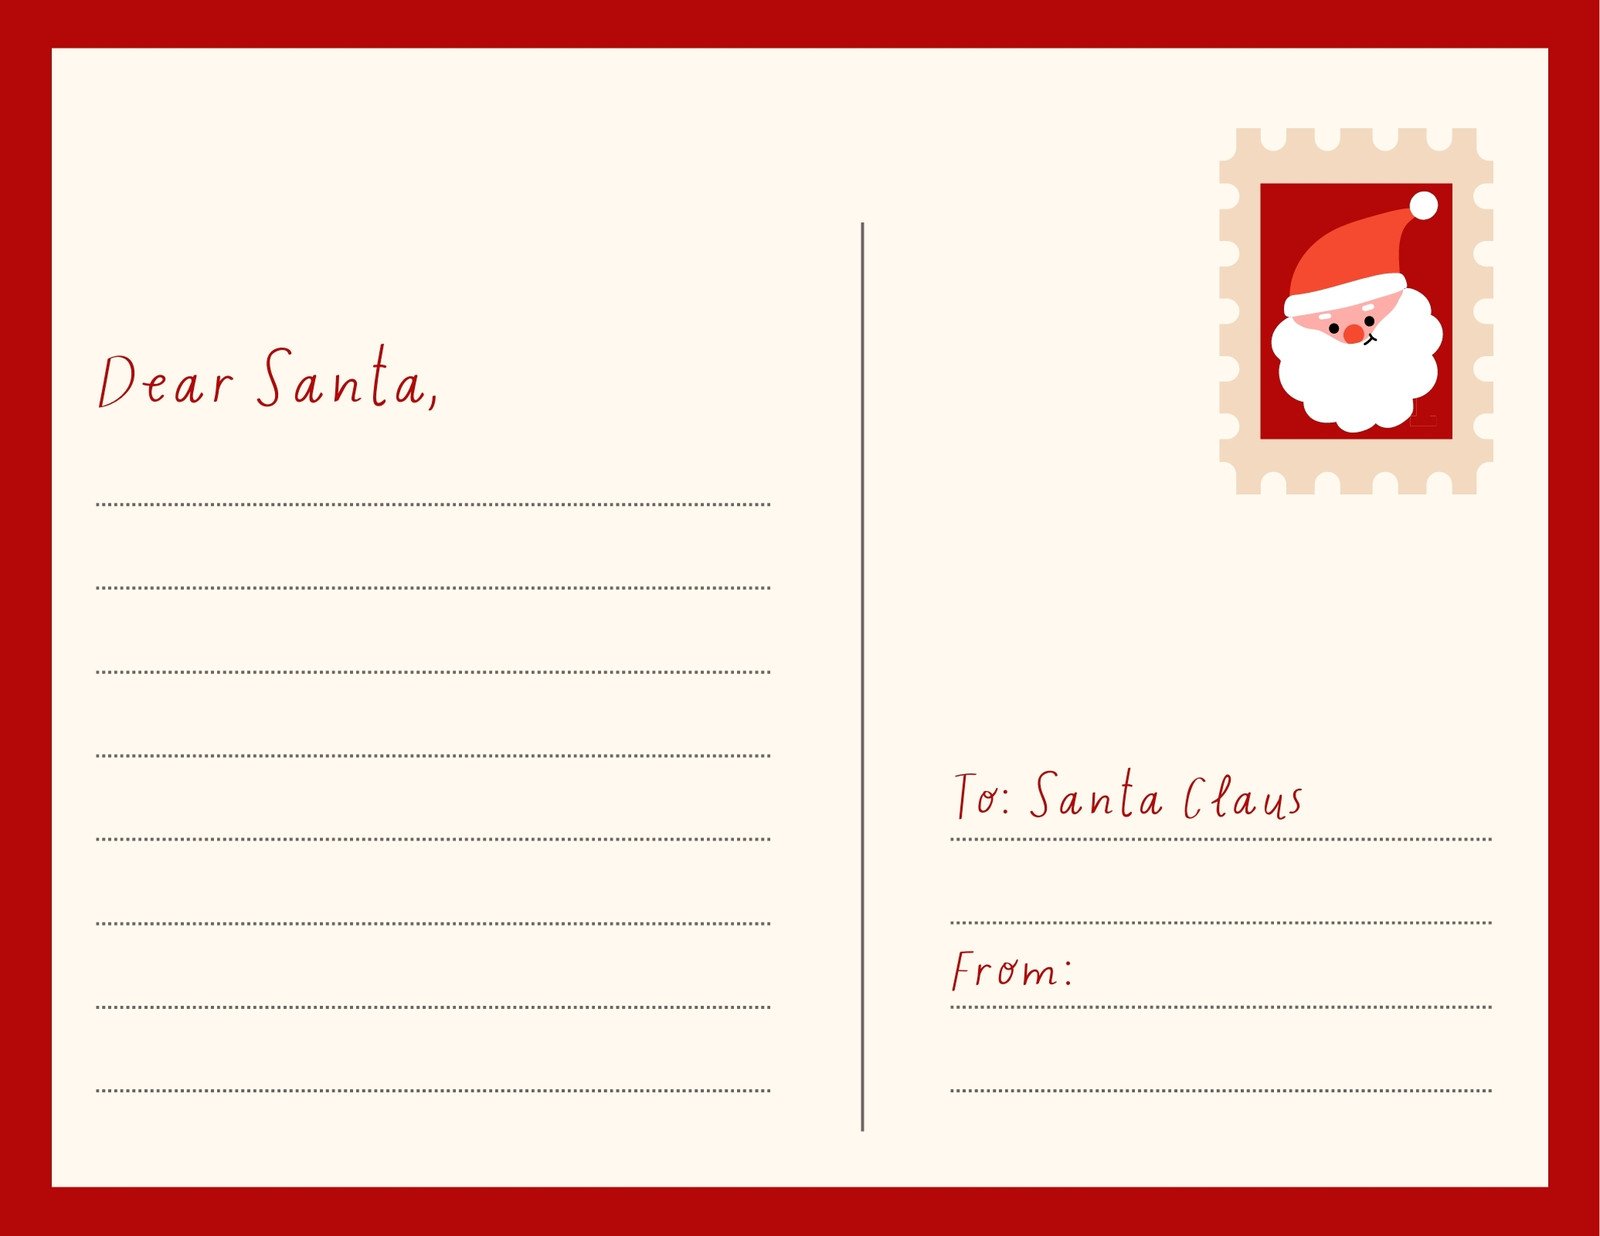 Design Your Own Holiday Postcards 